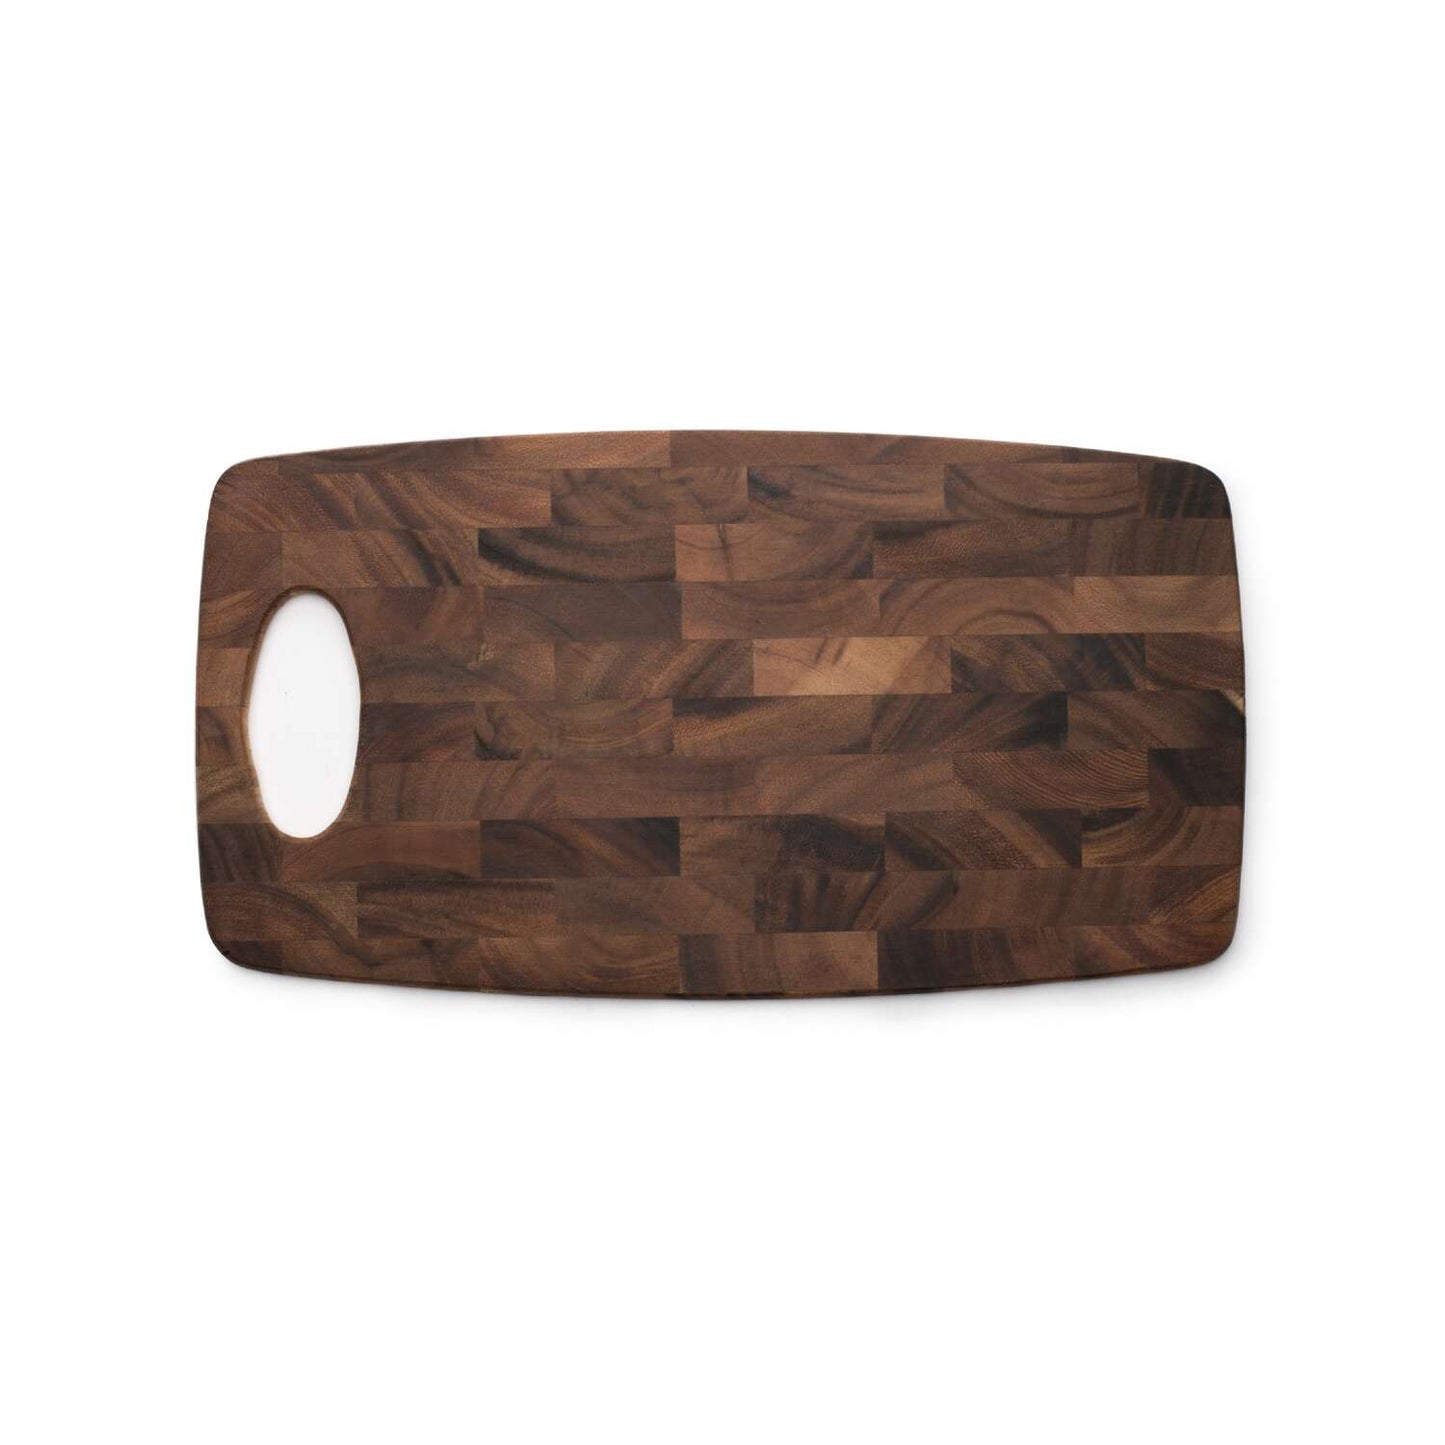 Functional + stylish? Get this beautiful end grain cutting board! Featuring a handle & made from acacia hardwood in stunning hues, this board is gorgeous & durable. End grain won't dull knives quickly as wood grain helps in cutting. Plus, acacia is sustainably sourced, not endangered. And for each harvest, a new tree is planted! Artful & eco-friendly? Count us in!